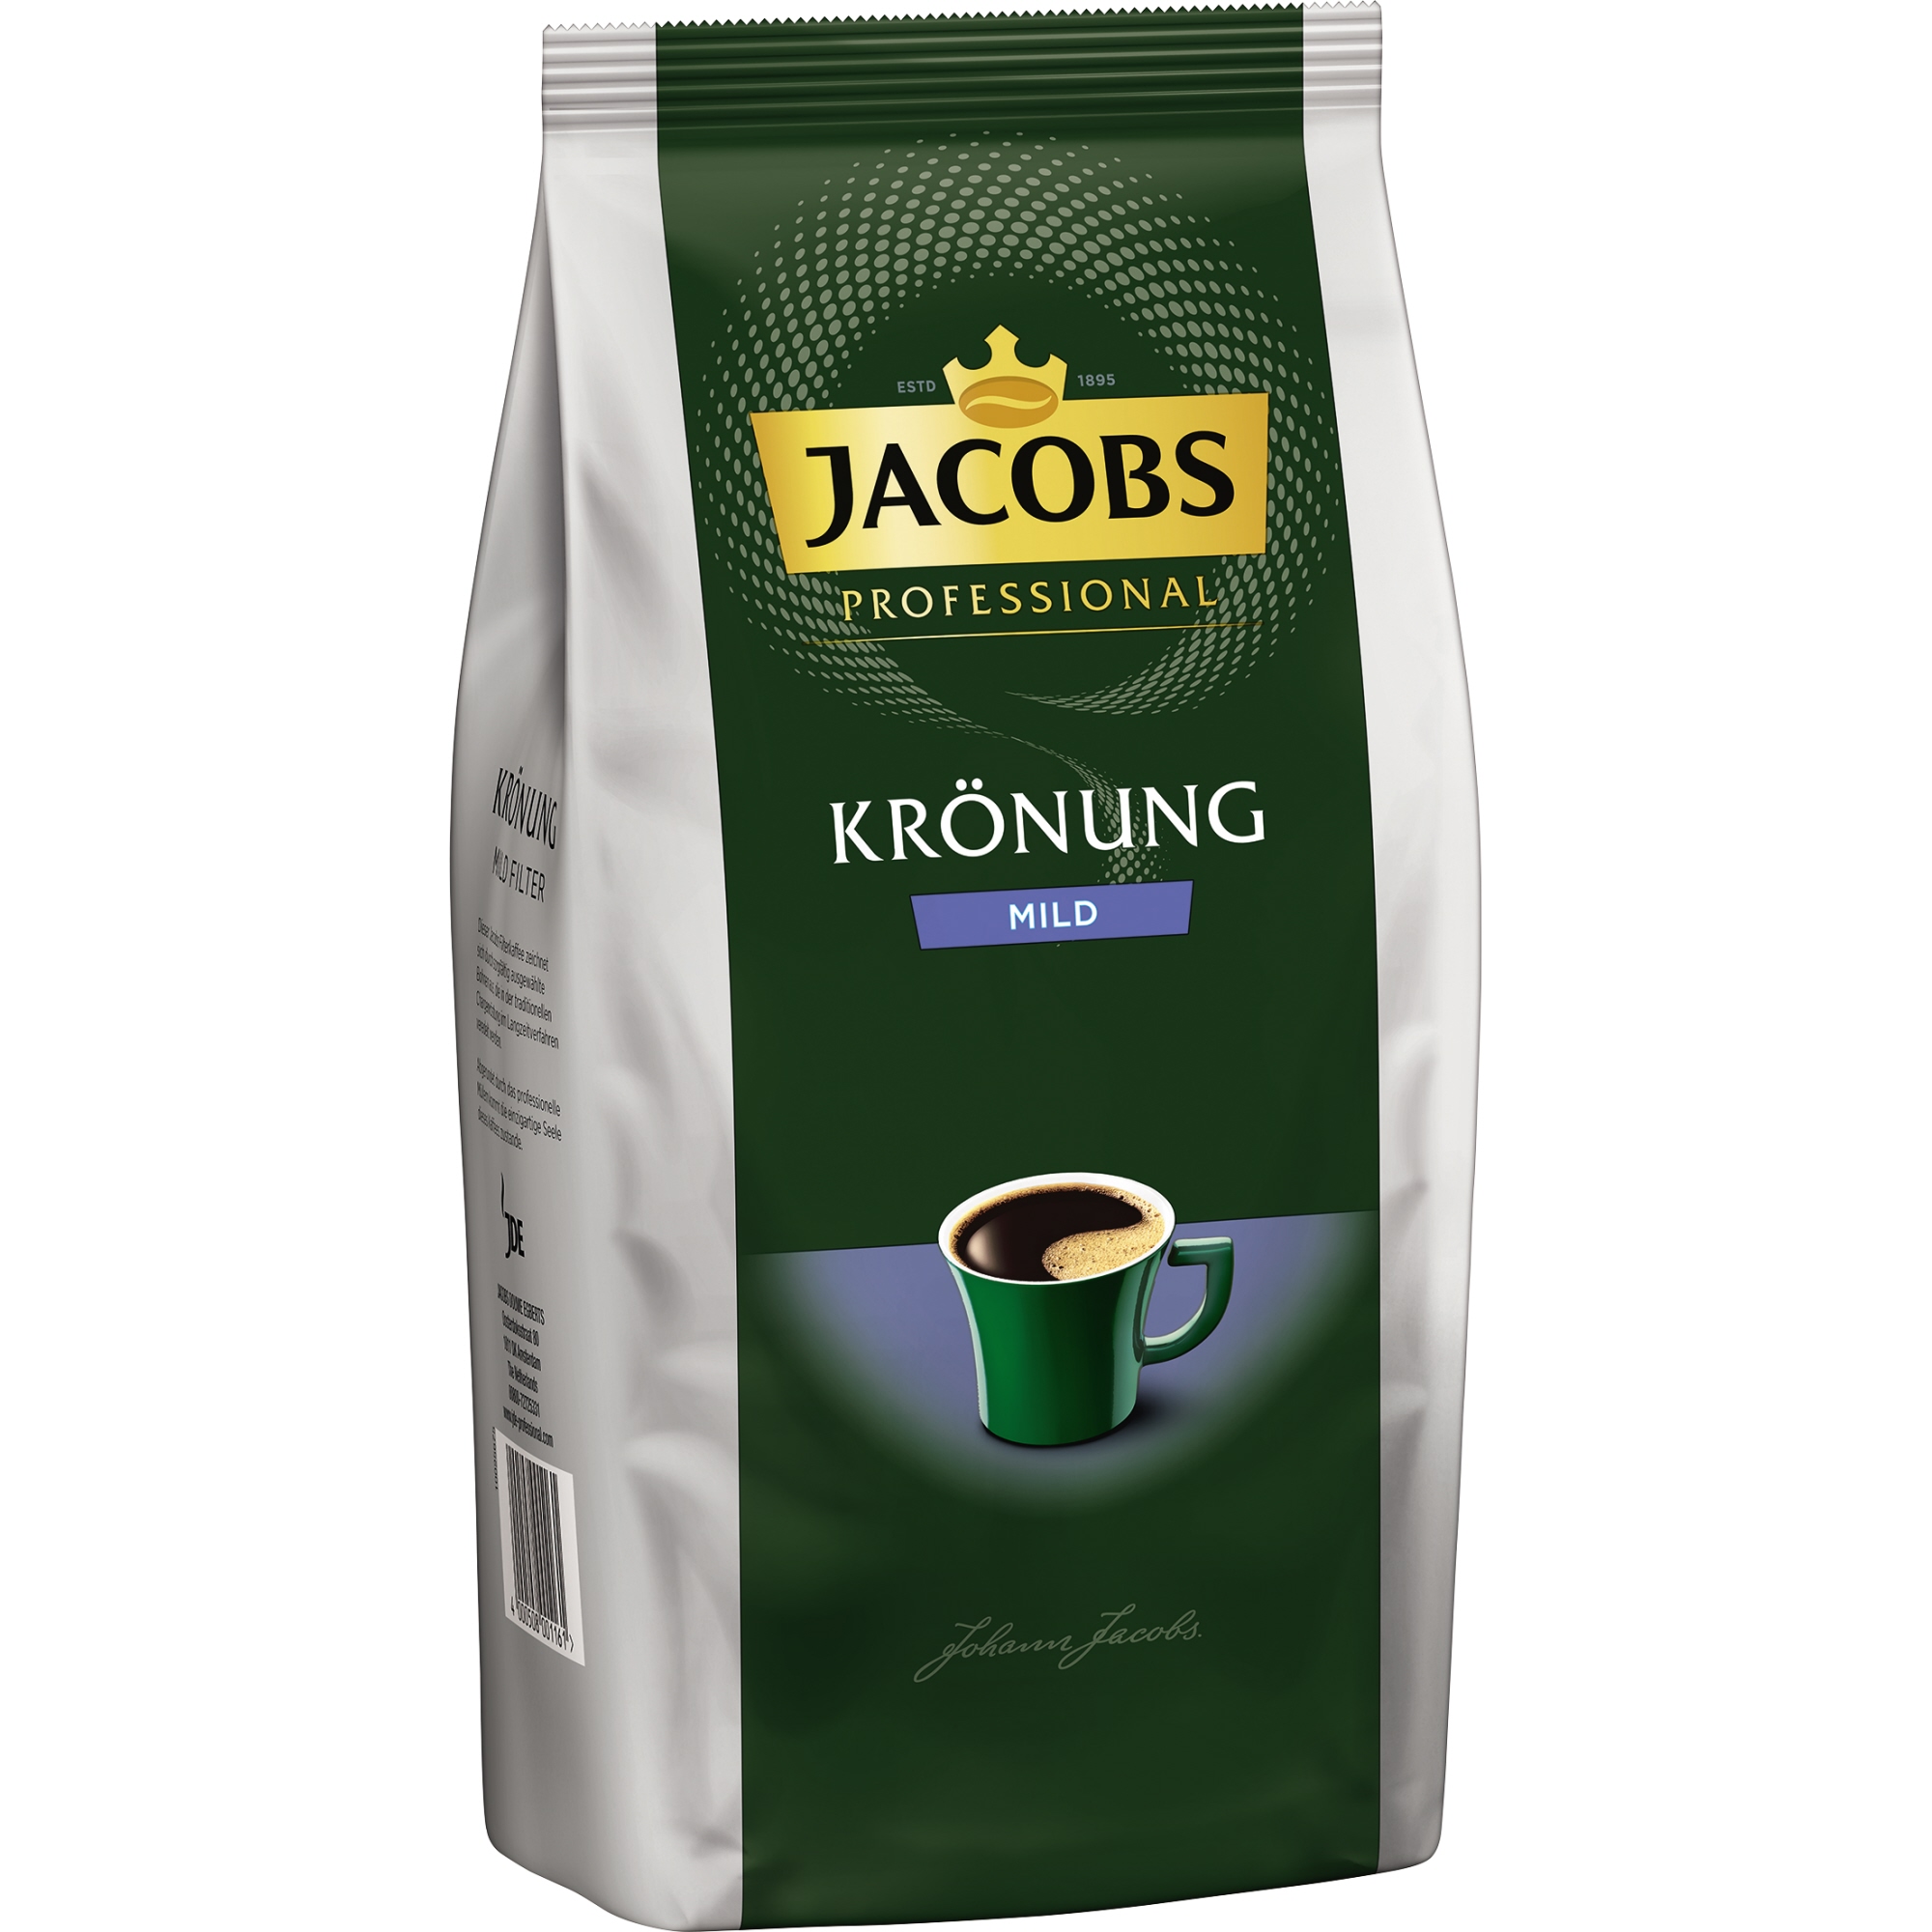 JACOBS Kaffee mild 1.000g Packung